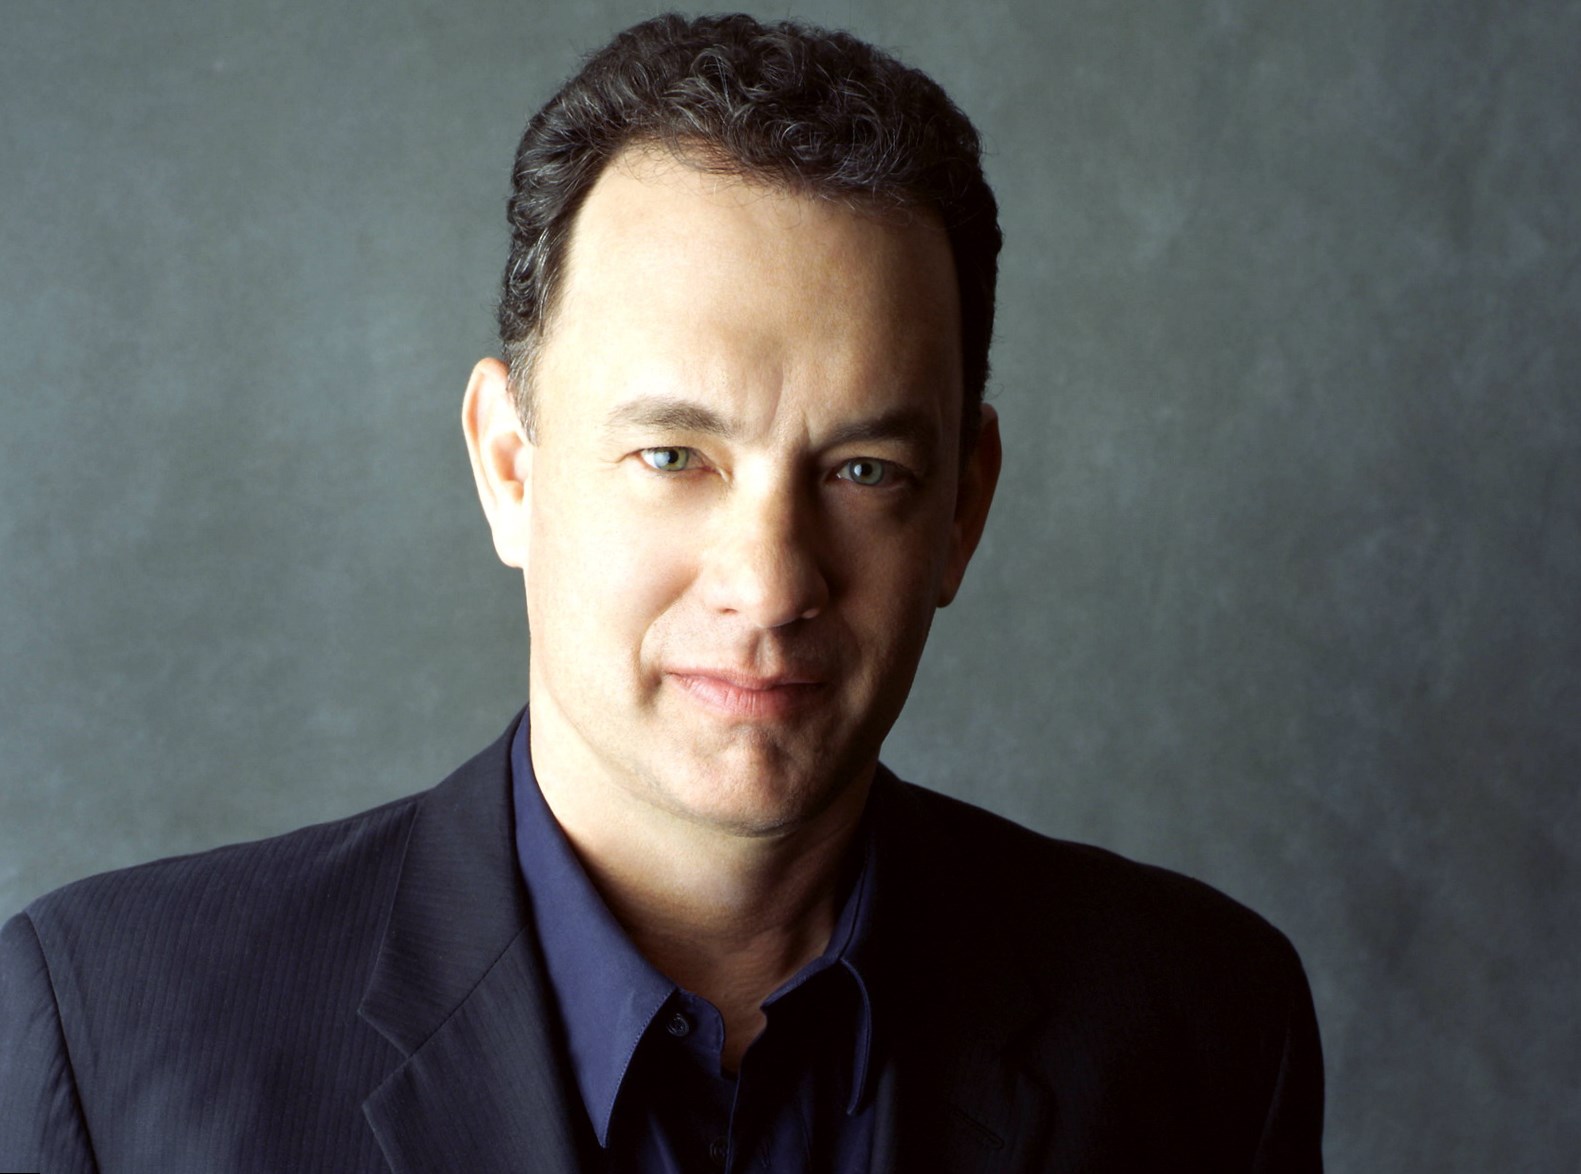 tom-hanks-says-diabetes-now-prevents-him-from-gaining-weight-for-roles